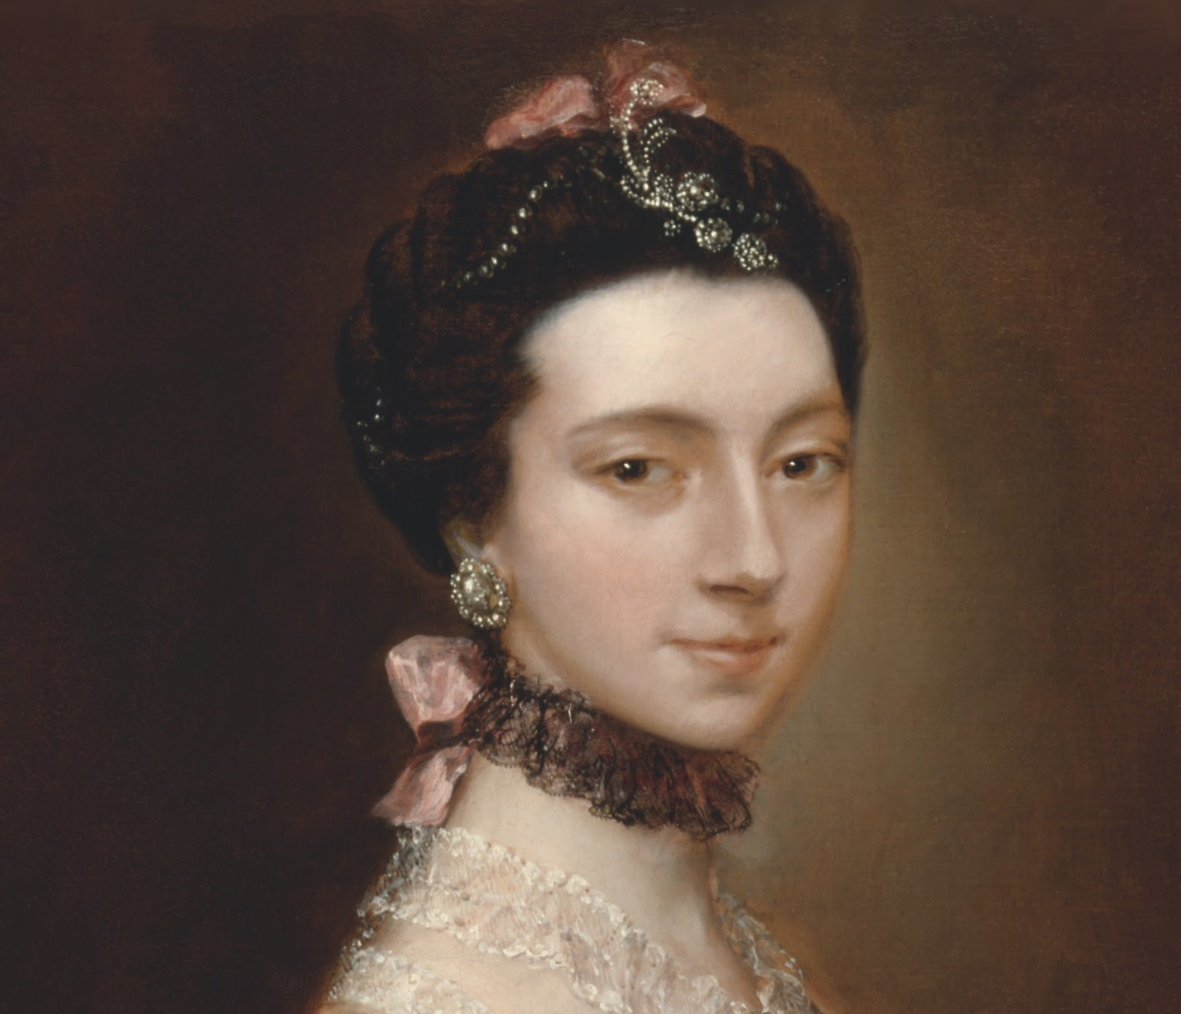 This out take shows Mary Little&#39;s unpowdered and mildly curled hair and the daimond and dark pearl jewels used to ornament it. - ca-1763-mary-little-later-9